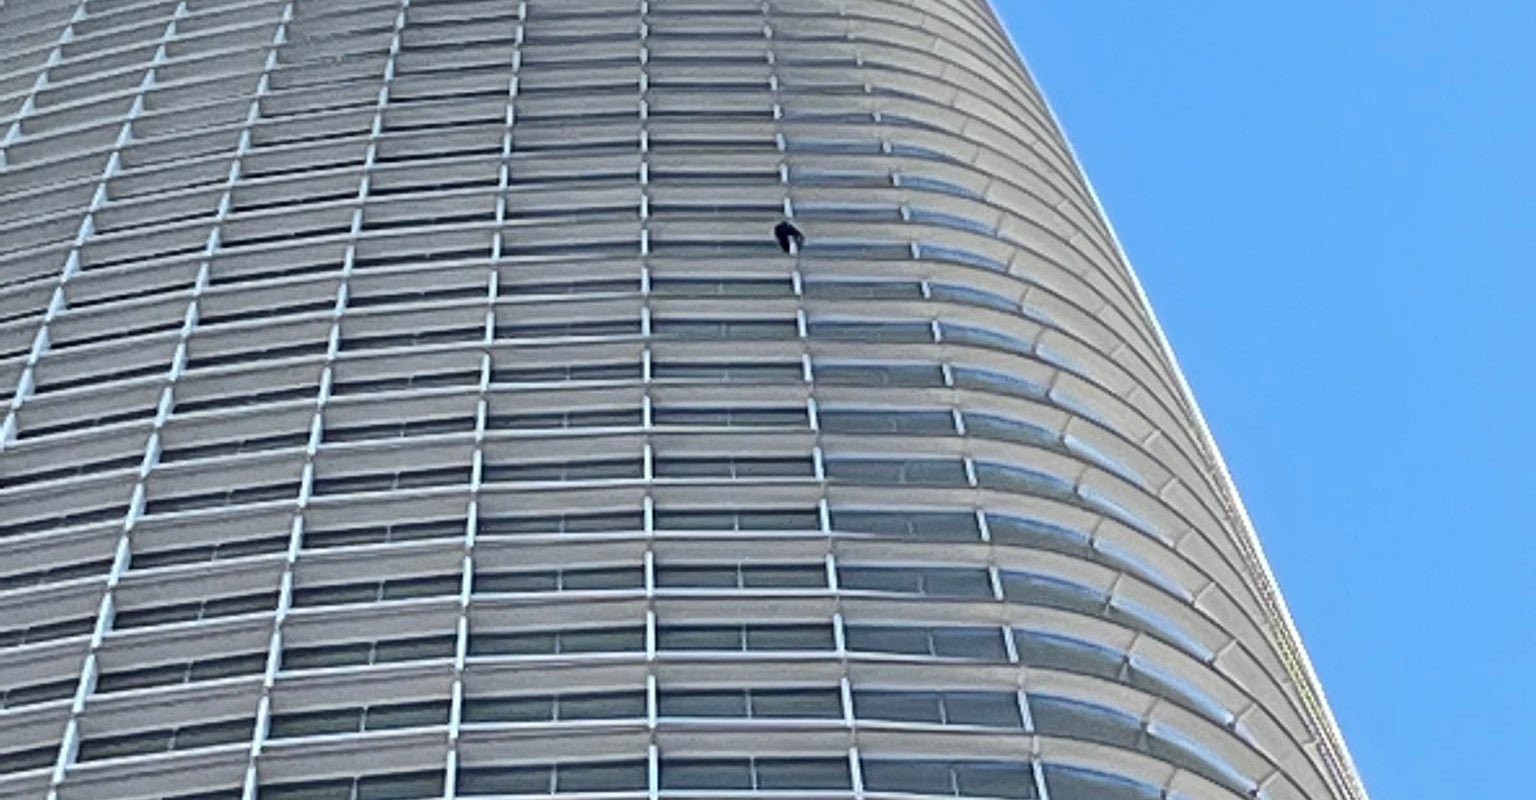 A man allegedly climbed the San Fransisco Salesforce tower Tuesday, May 3 to protest abortion, according to the man's supposed Instagram account. (Photo: San Fransisco Fire Department Media)